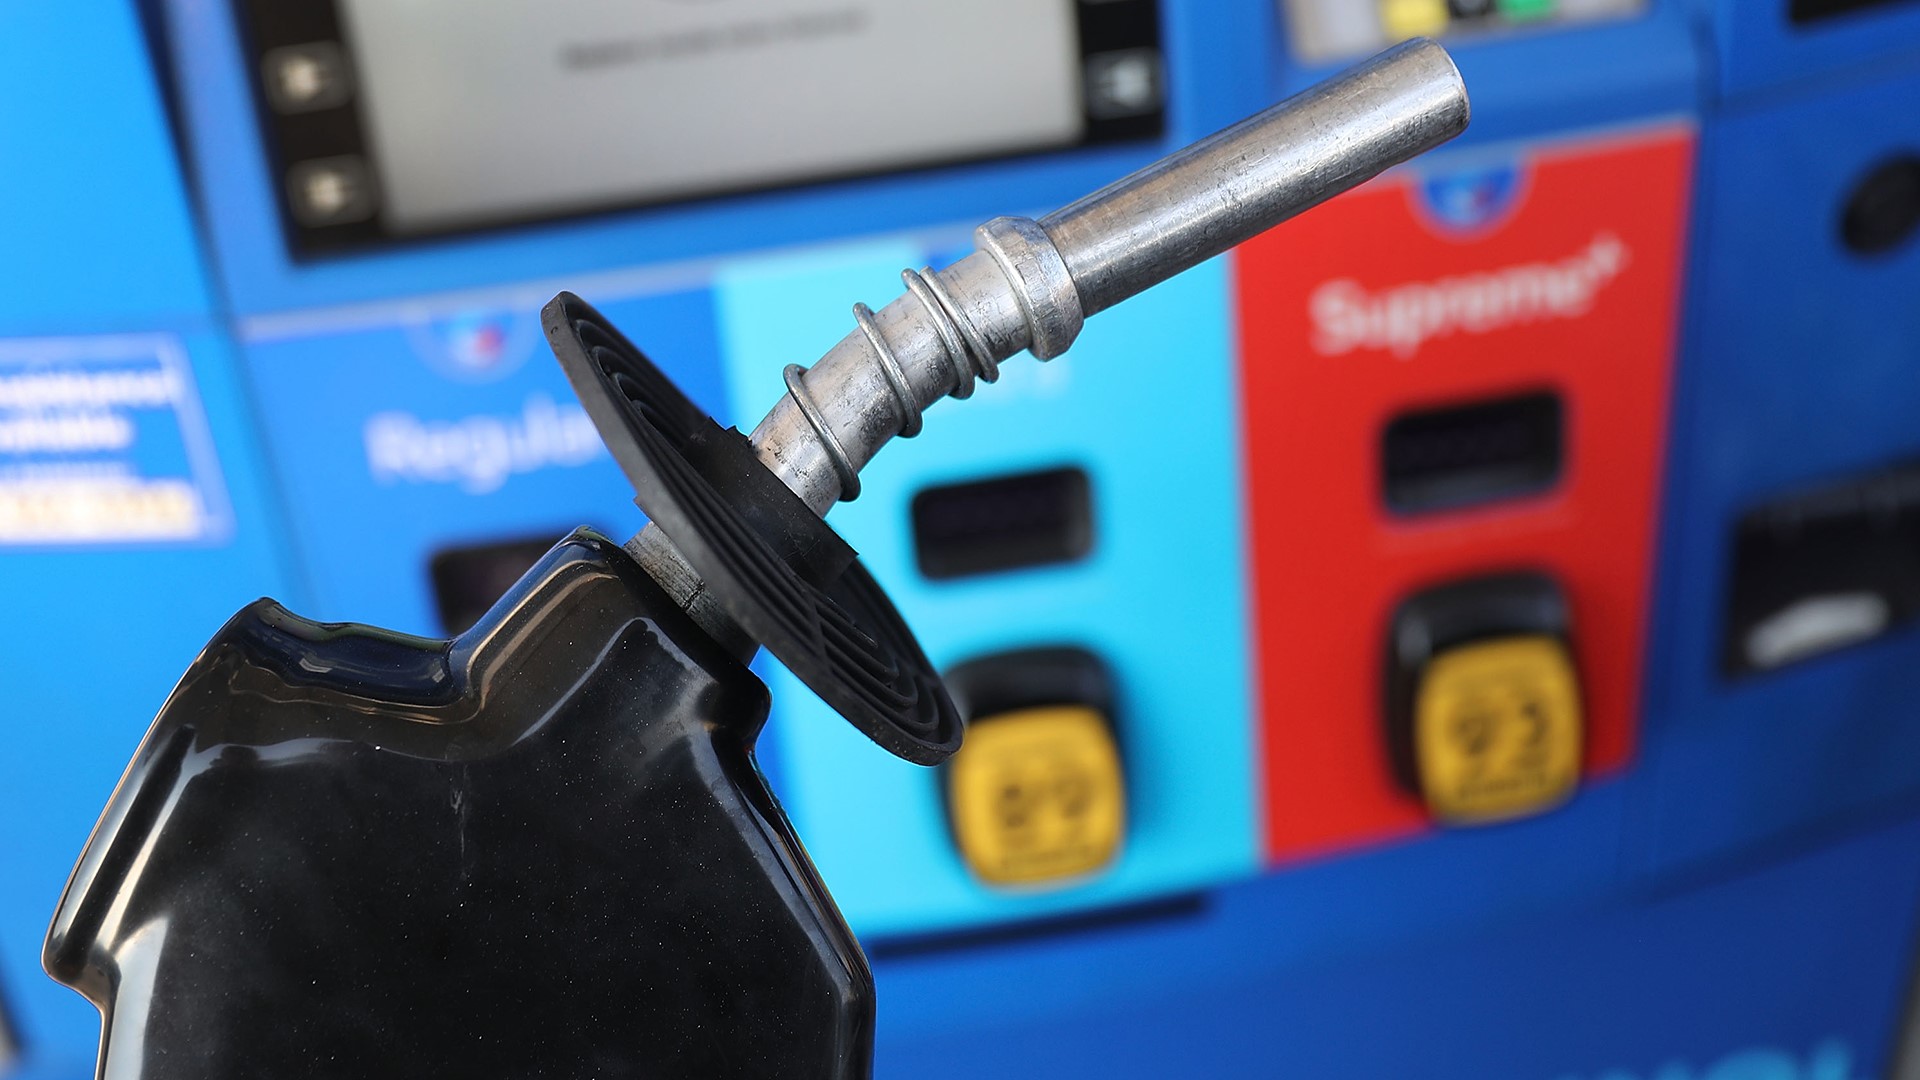 Democrats in Olympia rejected the idea of suspending Washington state's gas tax as prices at the pump rise.